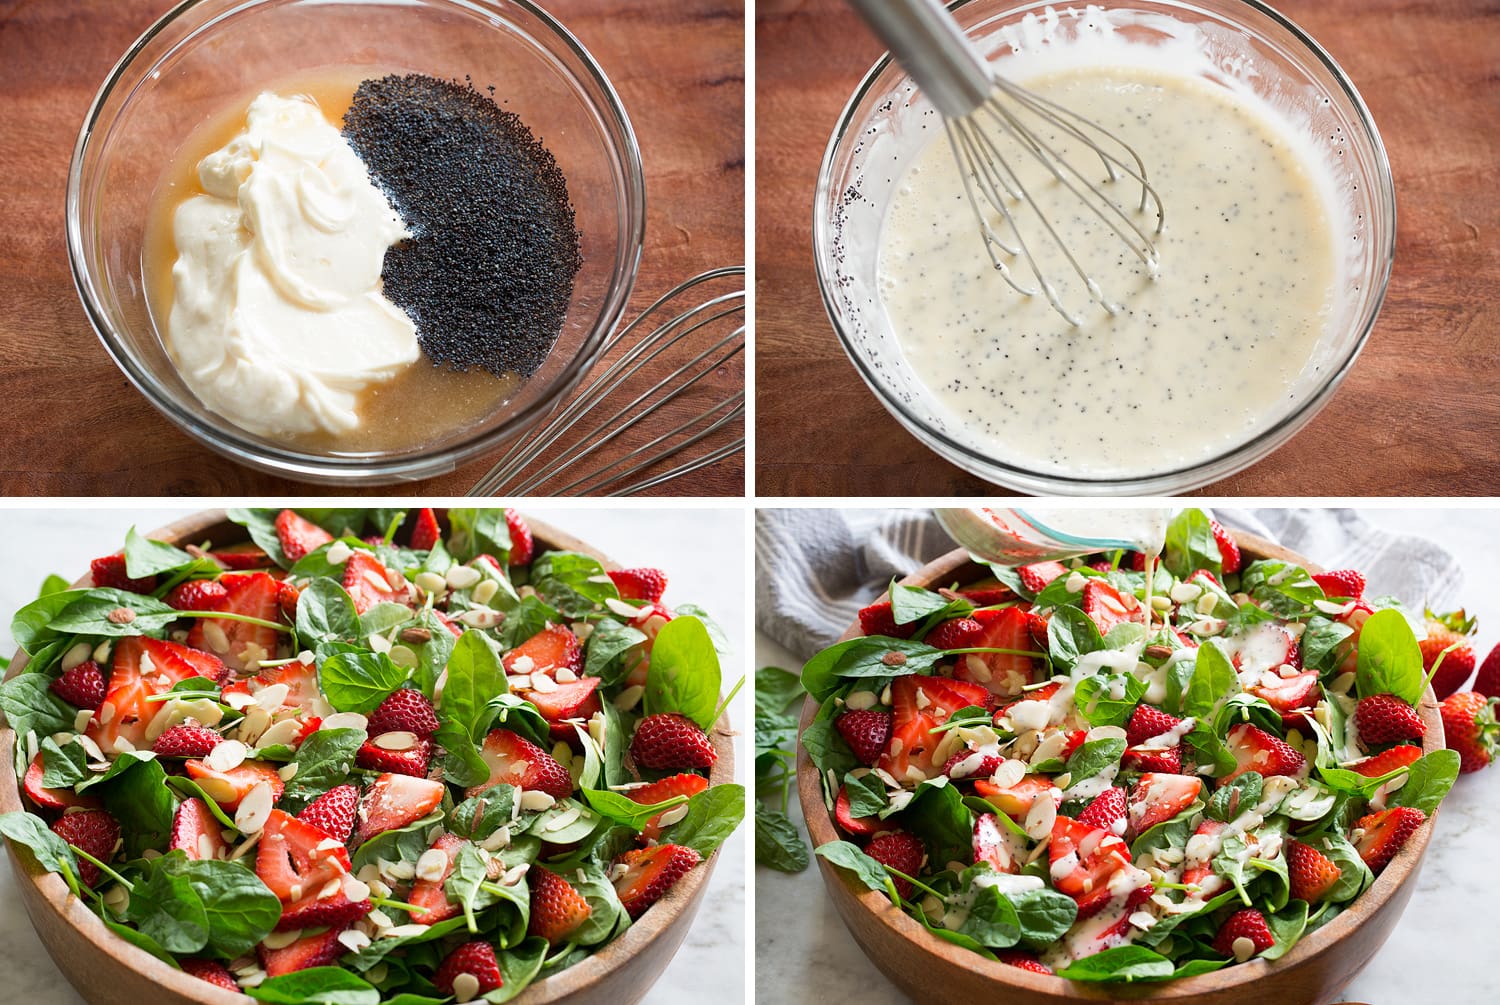 Steps of making strawberry spinach salad.